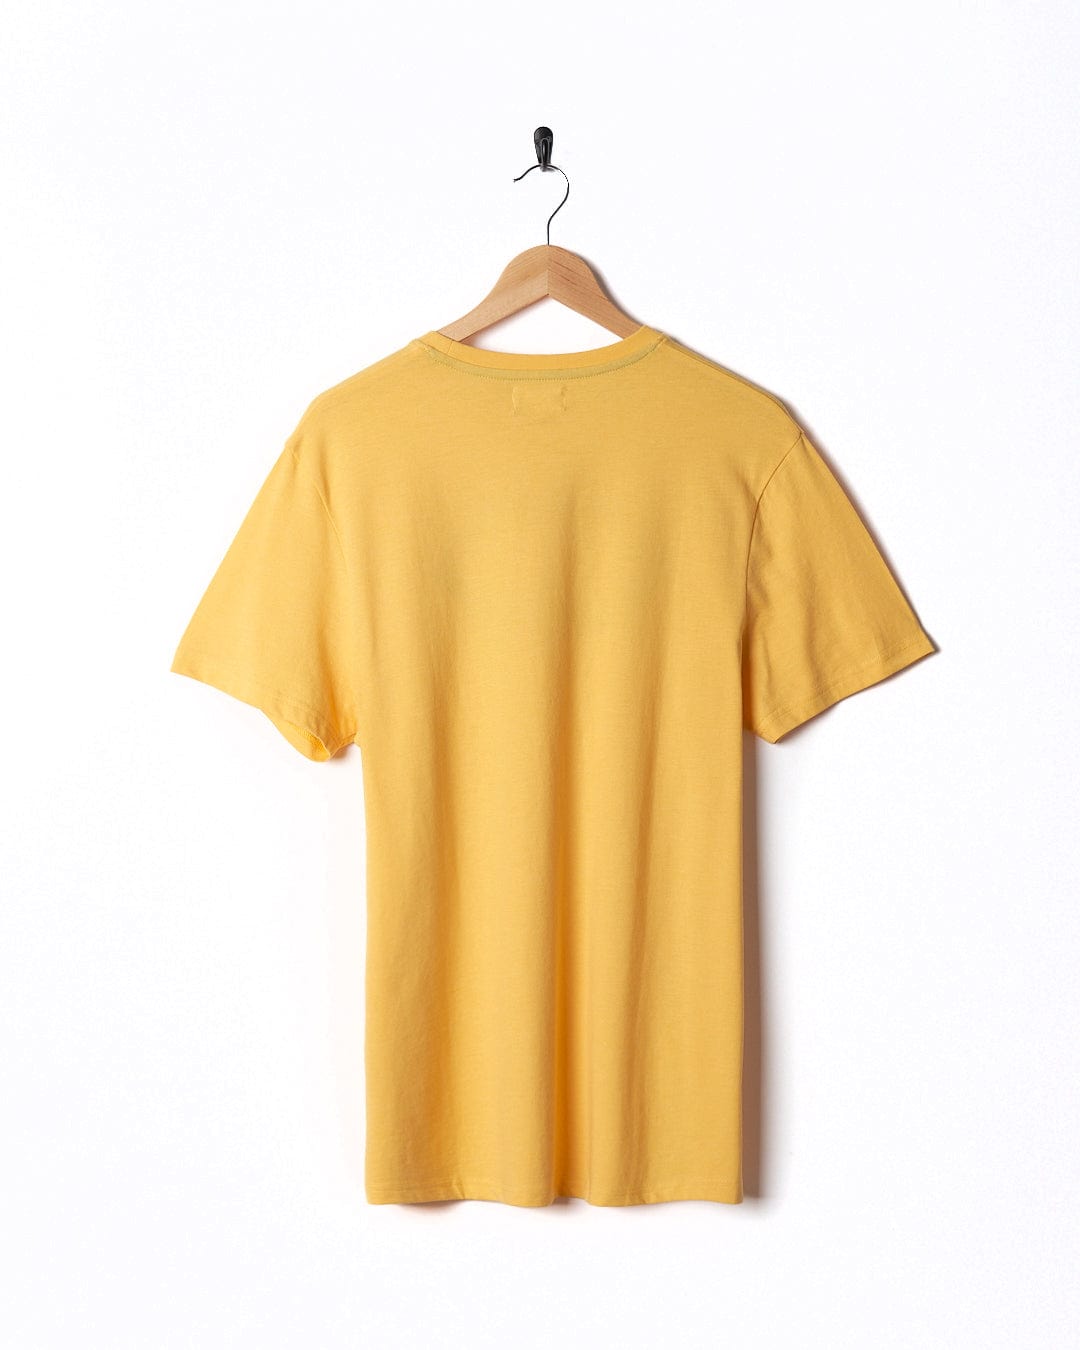 A Saltrock Gradient Hex - Mens Short Sleeve T-Shirt - Yellow hanging on a white wall.